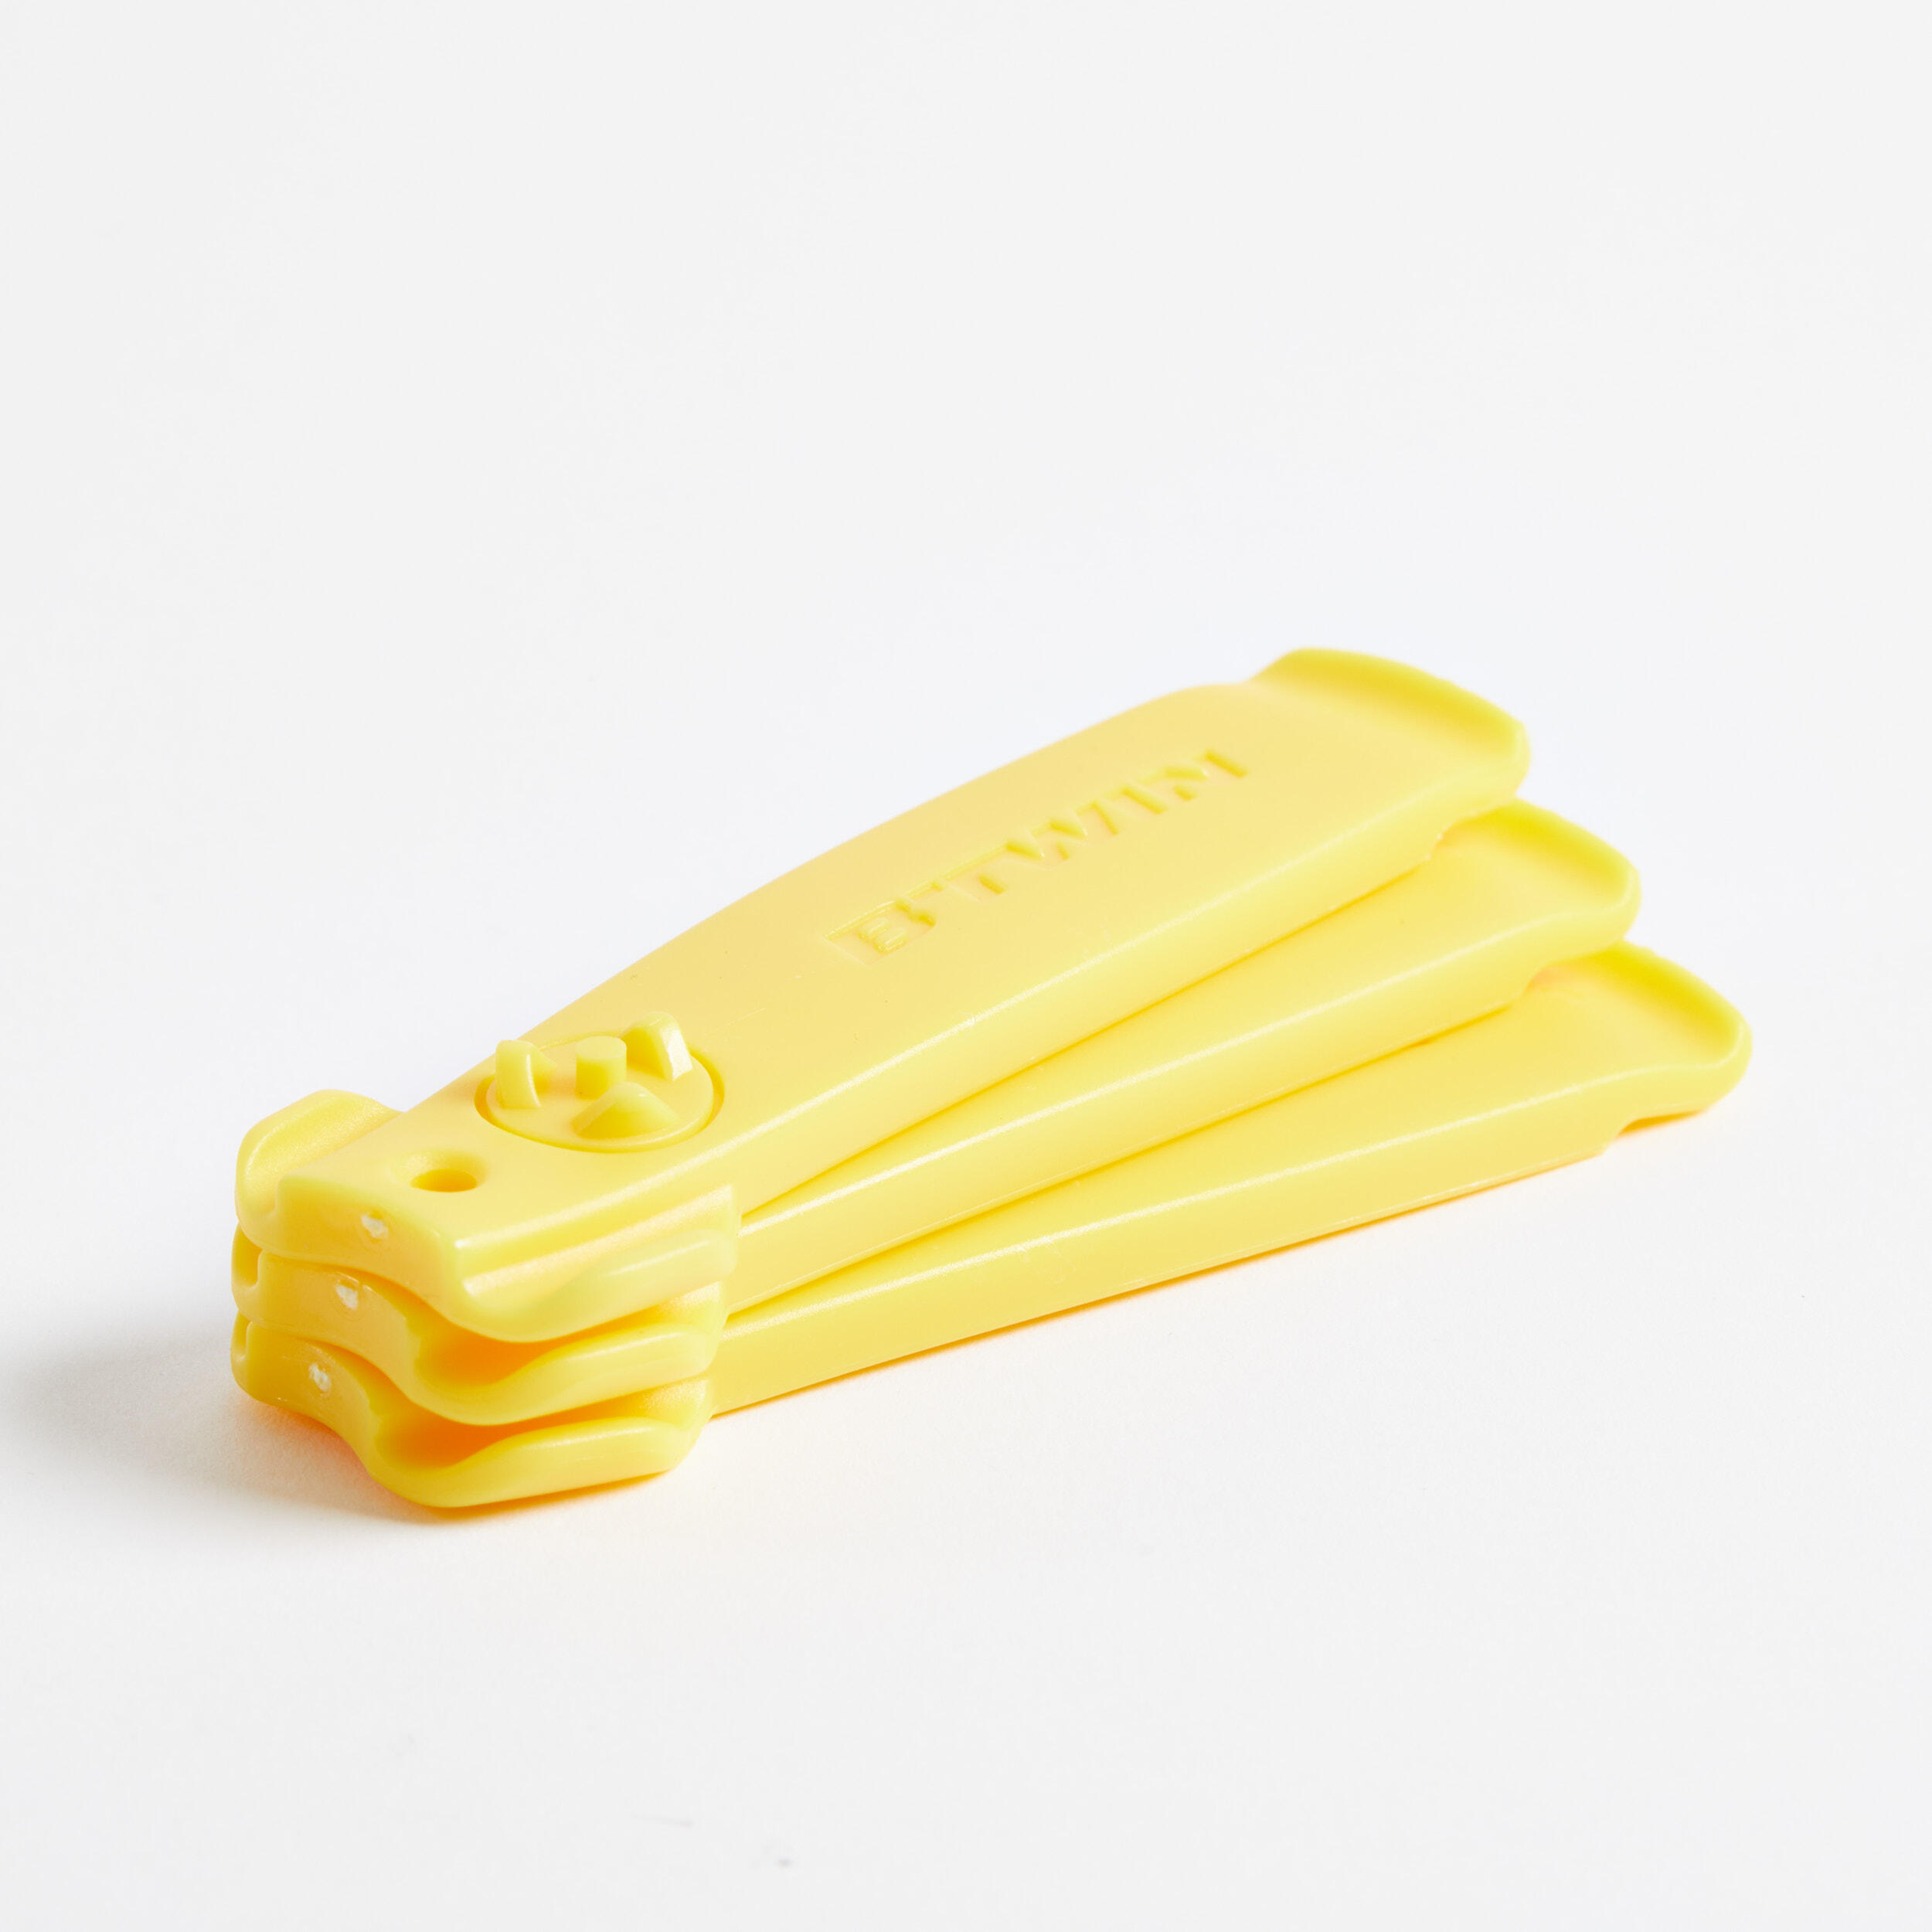 Pack of 3 Tire Levers - Yellow - DECATHLON